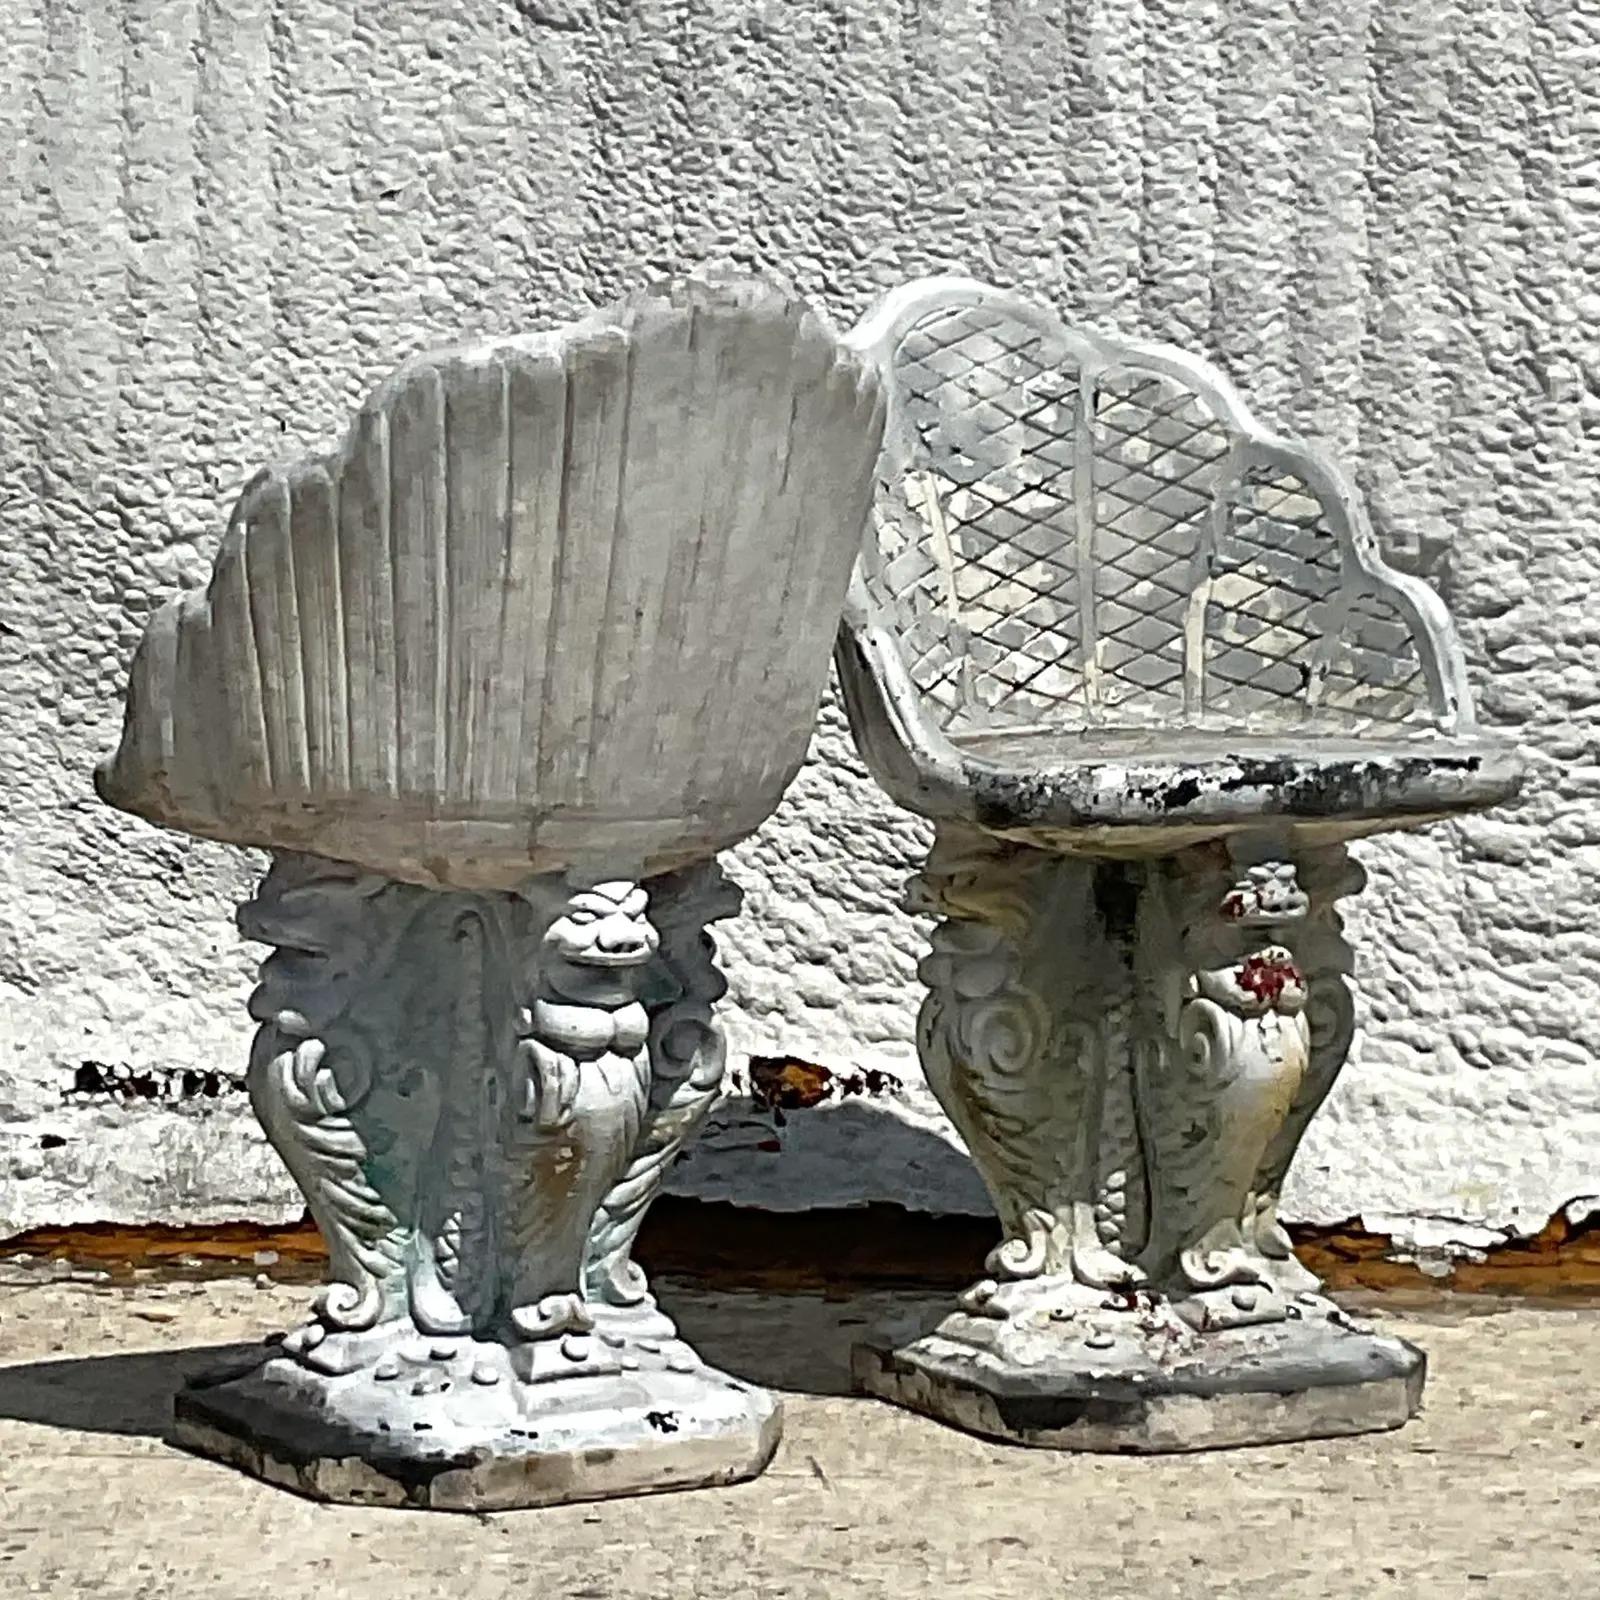 An extraordinary pair of vintage Regency cement chairs. The coveted Grotto design with lots of chic detail. The shell back chair rests on handsome winged griffins. Lots of great patina from time. Perfect as is or give them a coat of fresh paint to